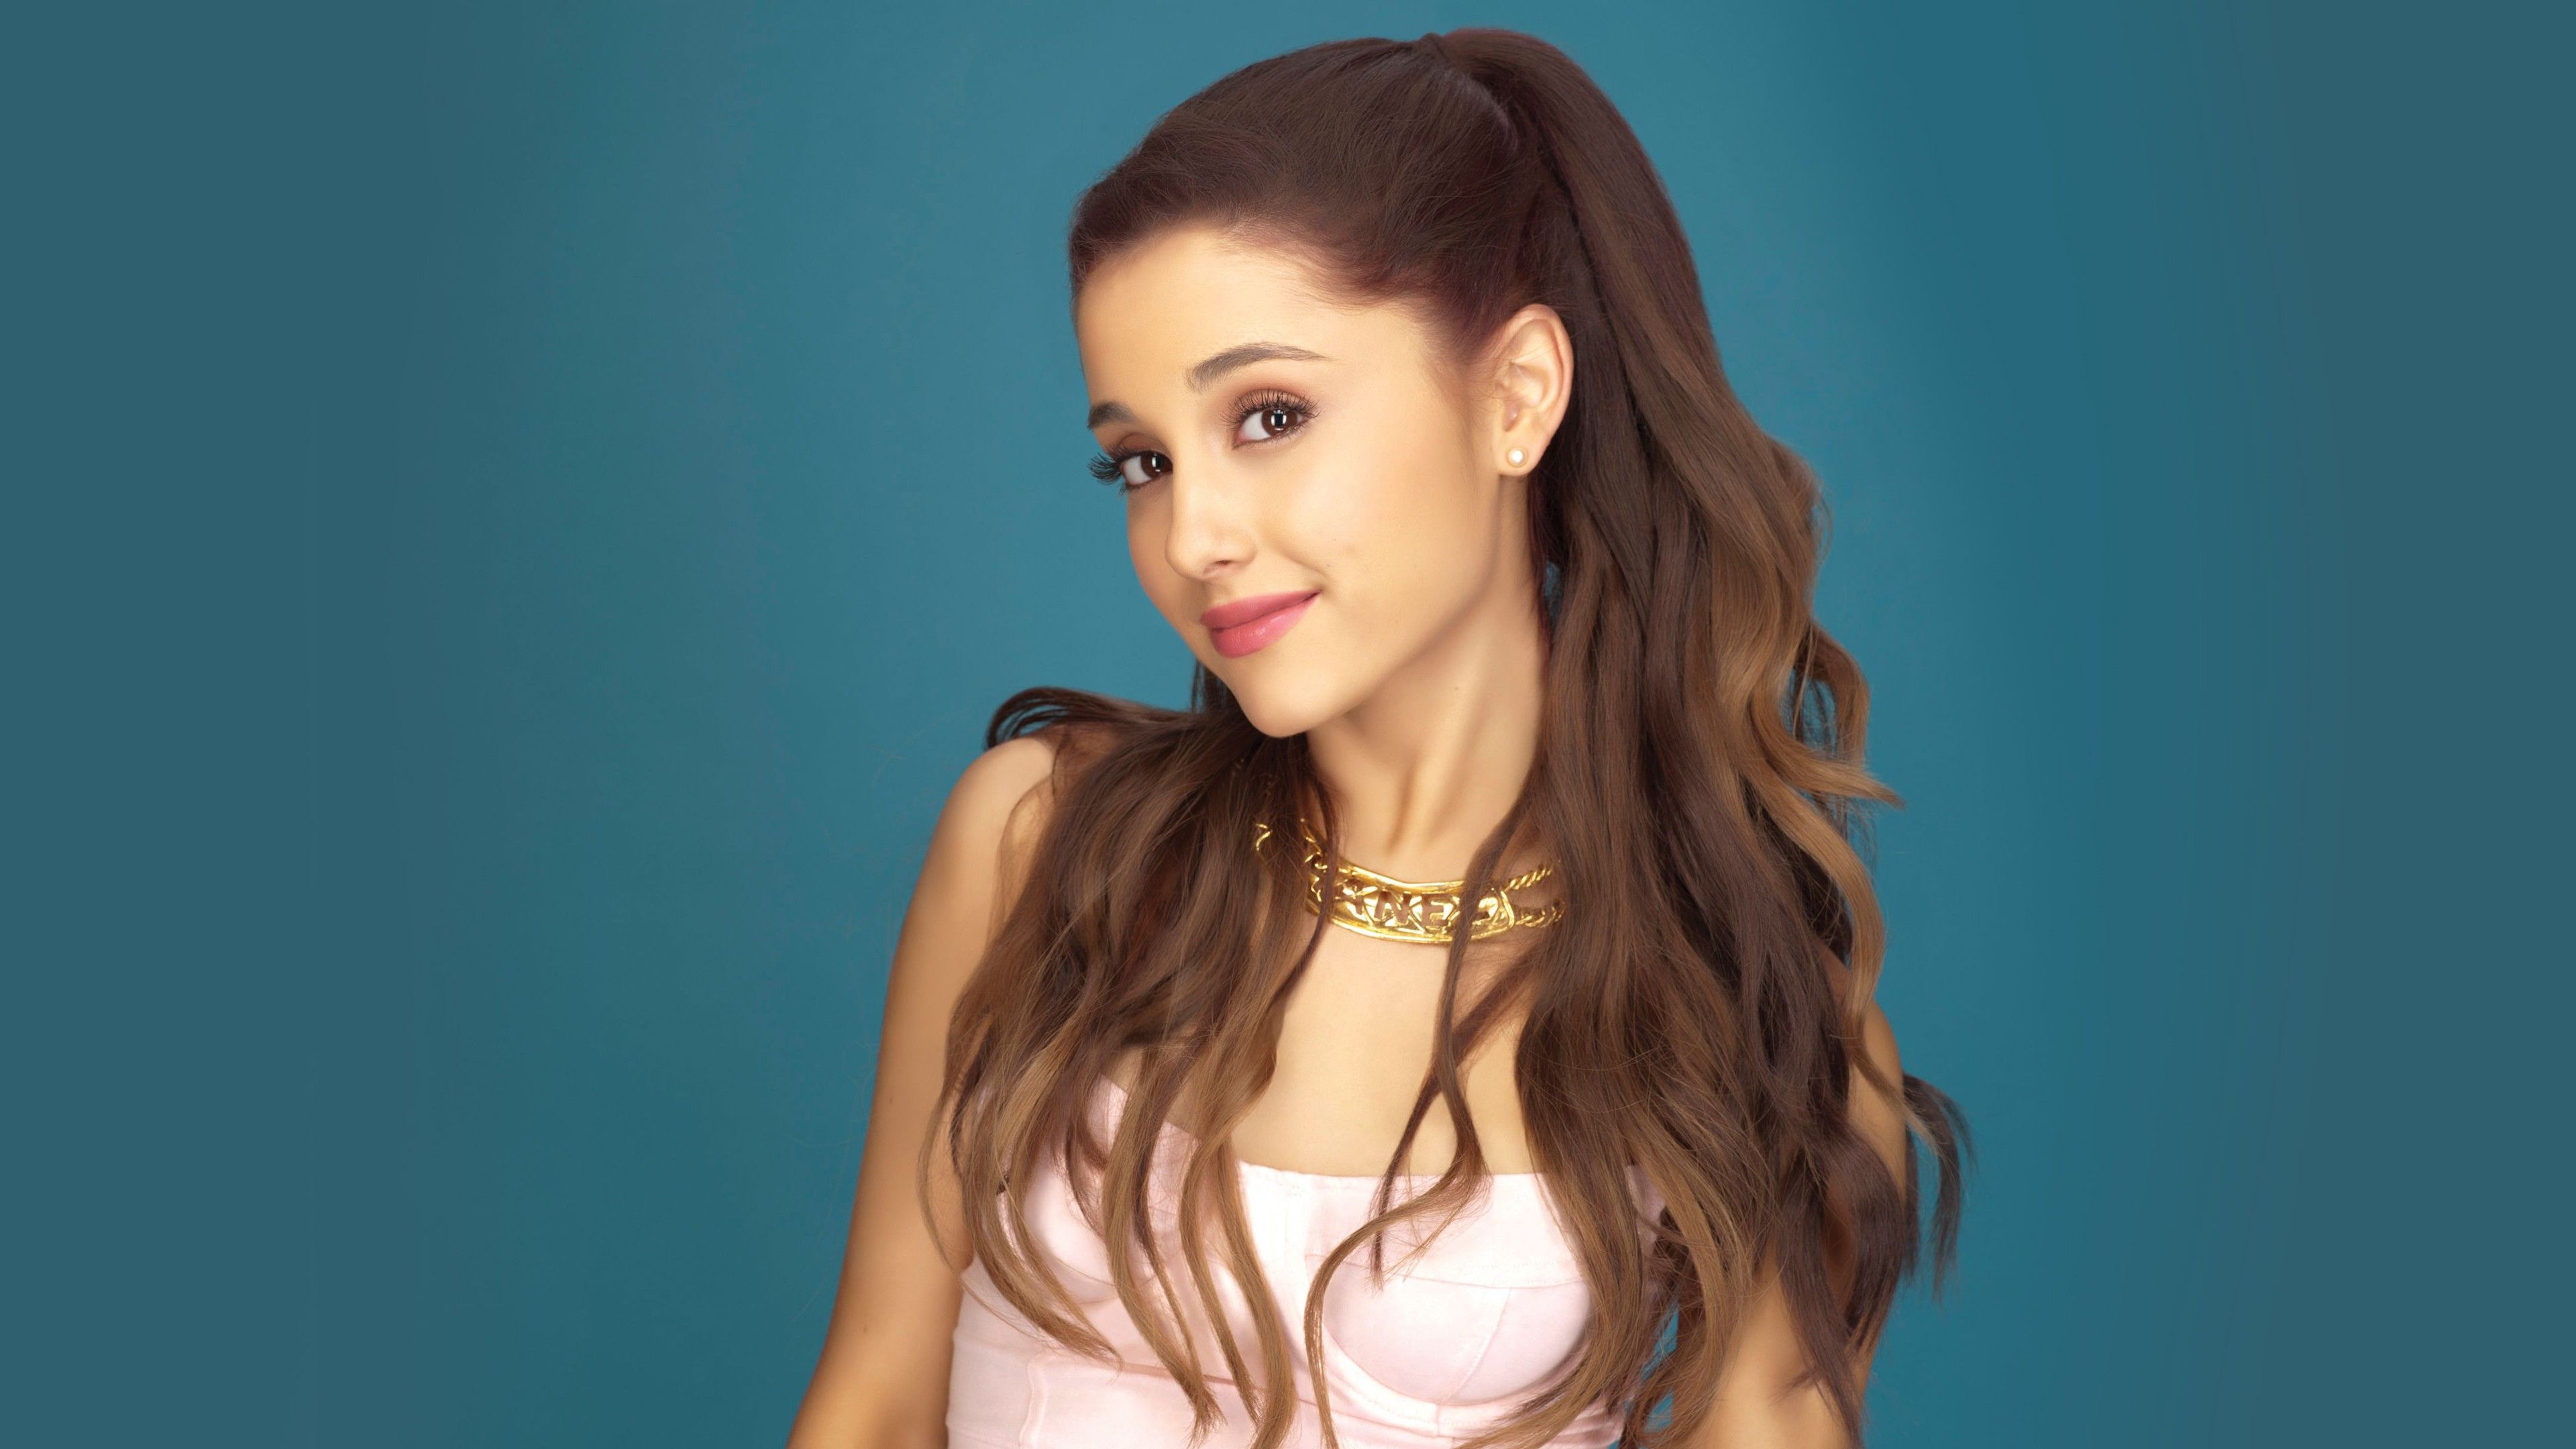 Brown Hair Ariana Grande With Pink Dress In Blue Background 4K HD Ariana Grande Wallpaper